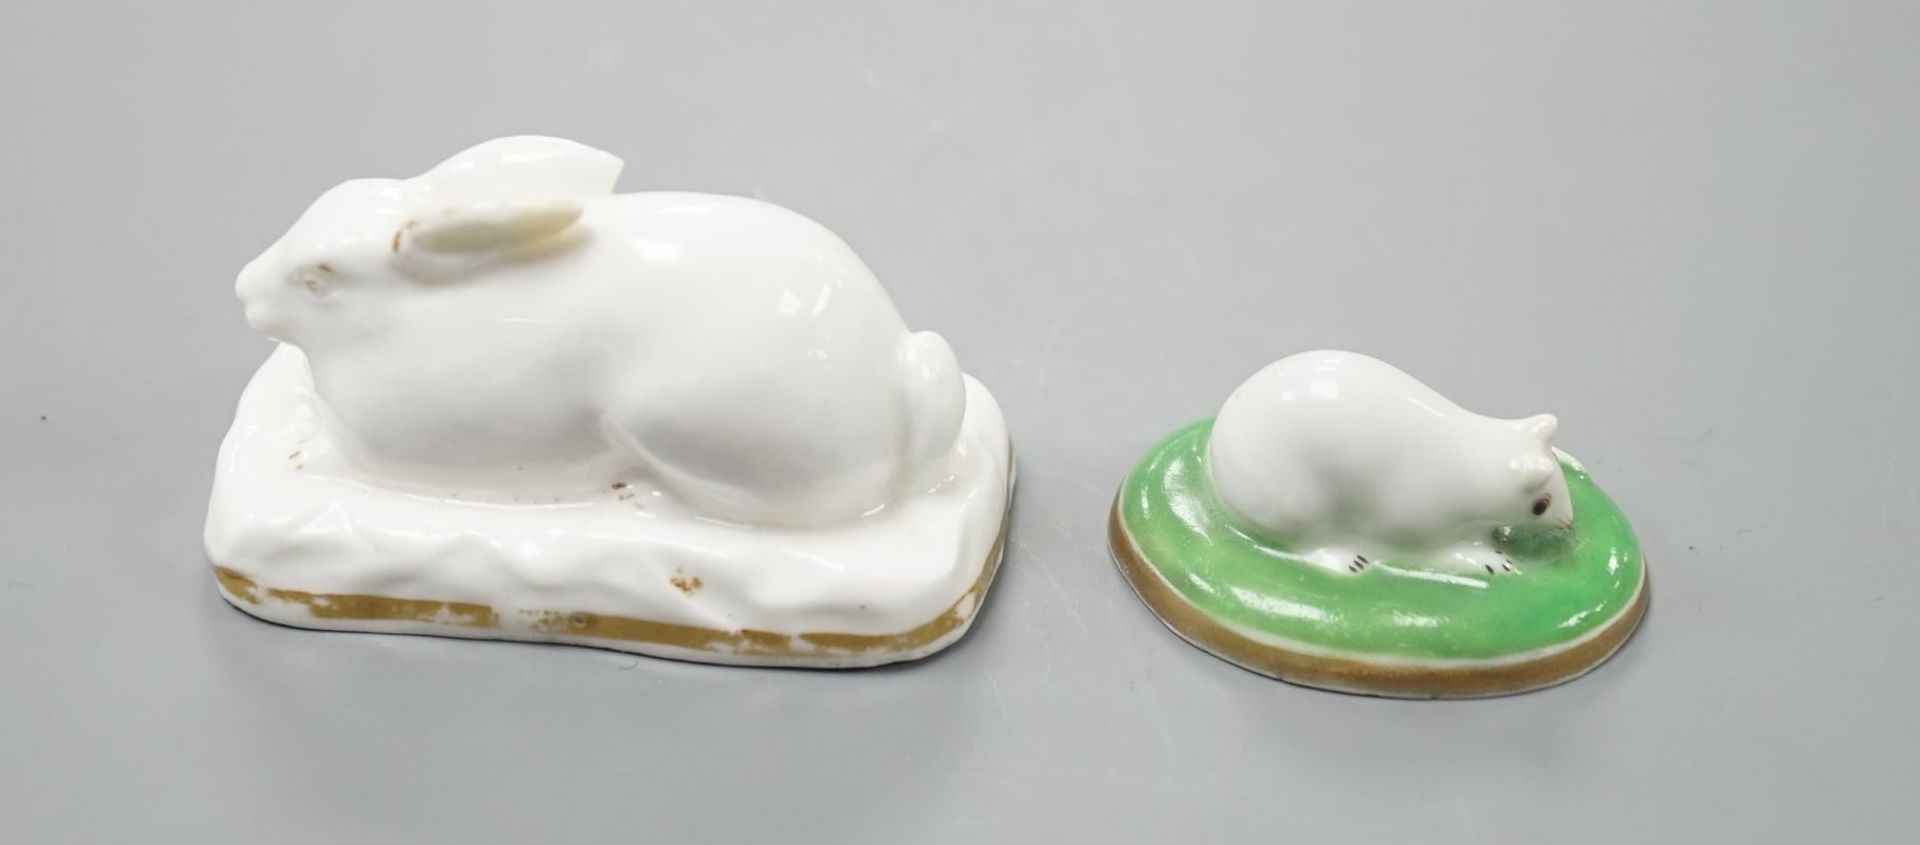 A rare Grainger Lee and co. porcelain model of a recumbent rabbit, c.1820-37, unmarked, 5.8 cm long and a Chamberlains porcelain model a recumbent mouse, c.1820-40, 3.9 cm long, Cf. Dennis G.Rice, English porcelain anima